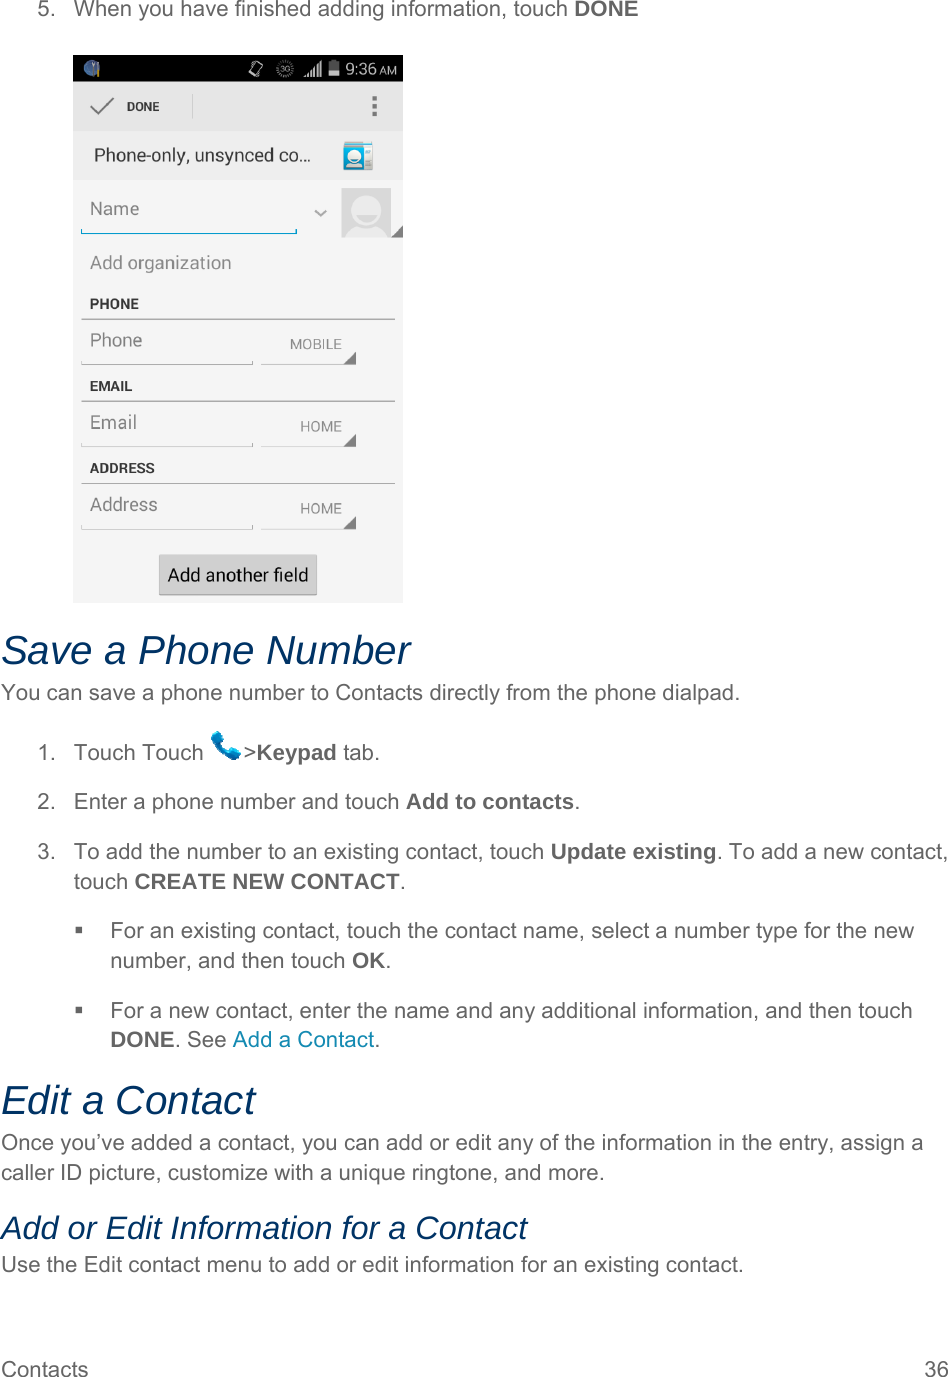 Contacts  36 5.  When you have finished adding information, touch DONE   Save a Phone Number You can save a phone number to Contacts directly from the phone dialpad. 1. Touch Touch  &gt;Keypad tab. 2.  Enter a phone number and touch Add to contacts. 3.  To add the number to an existing contact, touch Update existing. To add a new contact, touch CREATE NEW CONTACT.   For an existing contact, touch the contact name, select a number type for the new number, and then touch OK.   For a new contact, enter the name and any additional information, and then touch DONE. See Add a Contact. Edit a Contact Once you’ve added a contact, you can add or edit any of the information in the entry, assign a caller ID picture, customize with a unique ringtone, and more. Add or Edit Information for a Contact Use the Edit contact menu to add or edit information for an existing contact. 